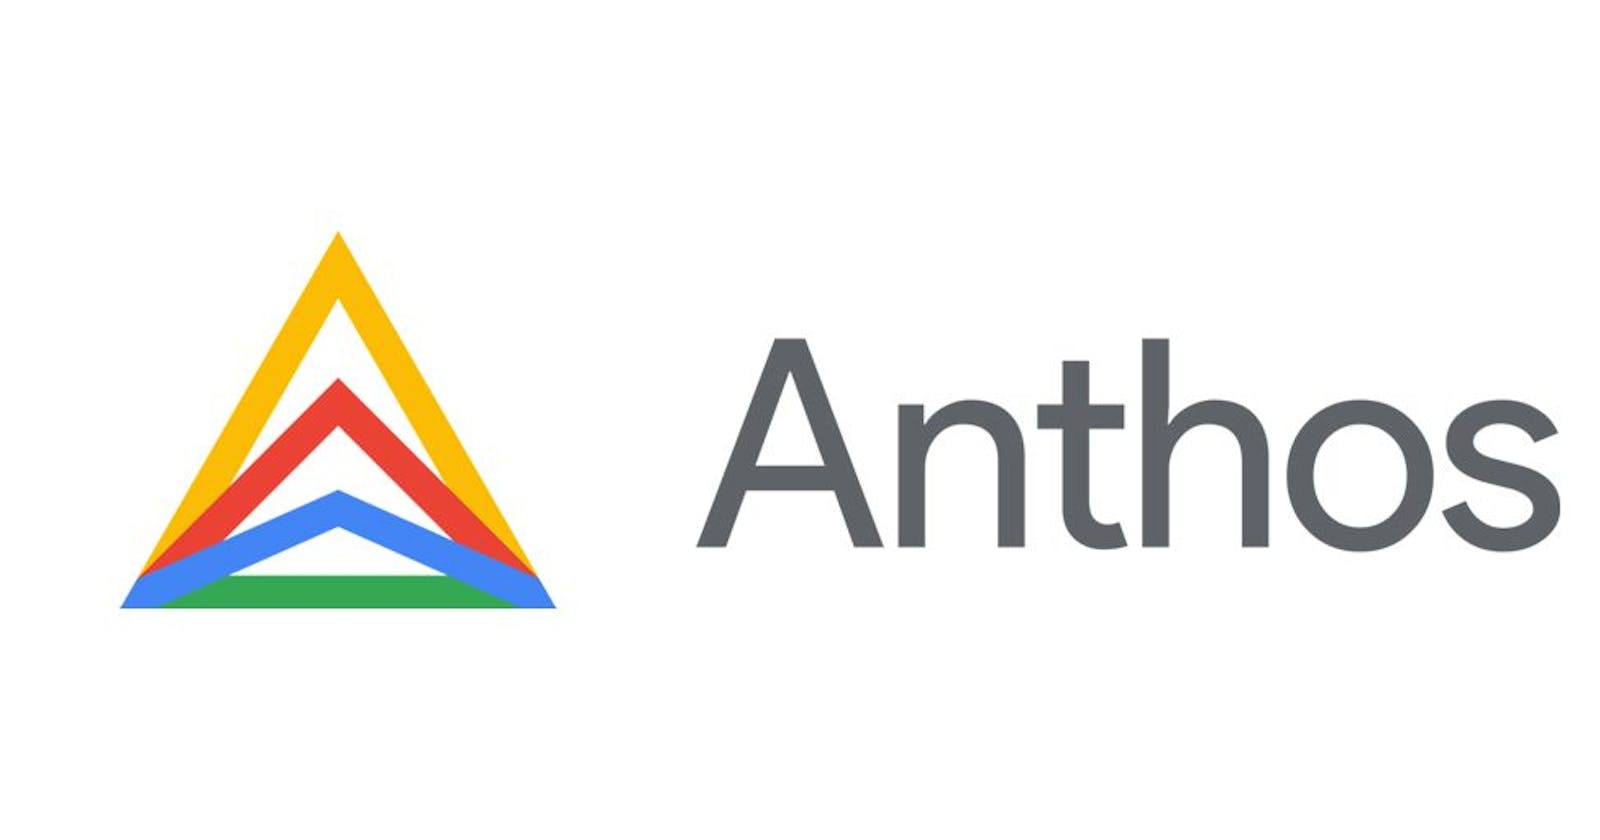 Part 1: Introduction to Anthos